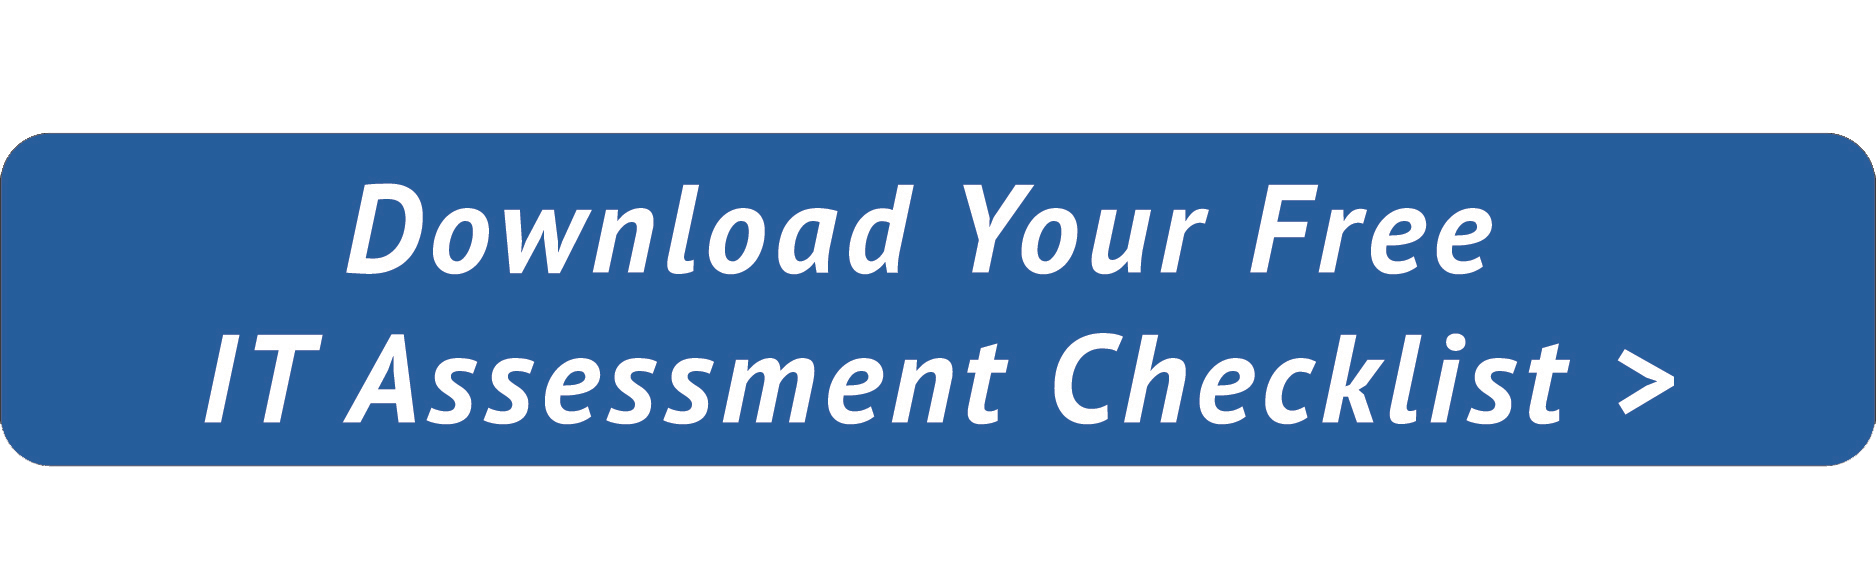 Download Your Free IT Assessment Checklist 